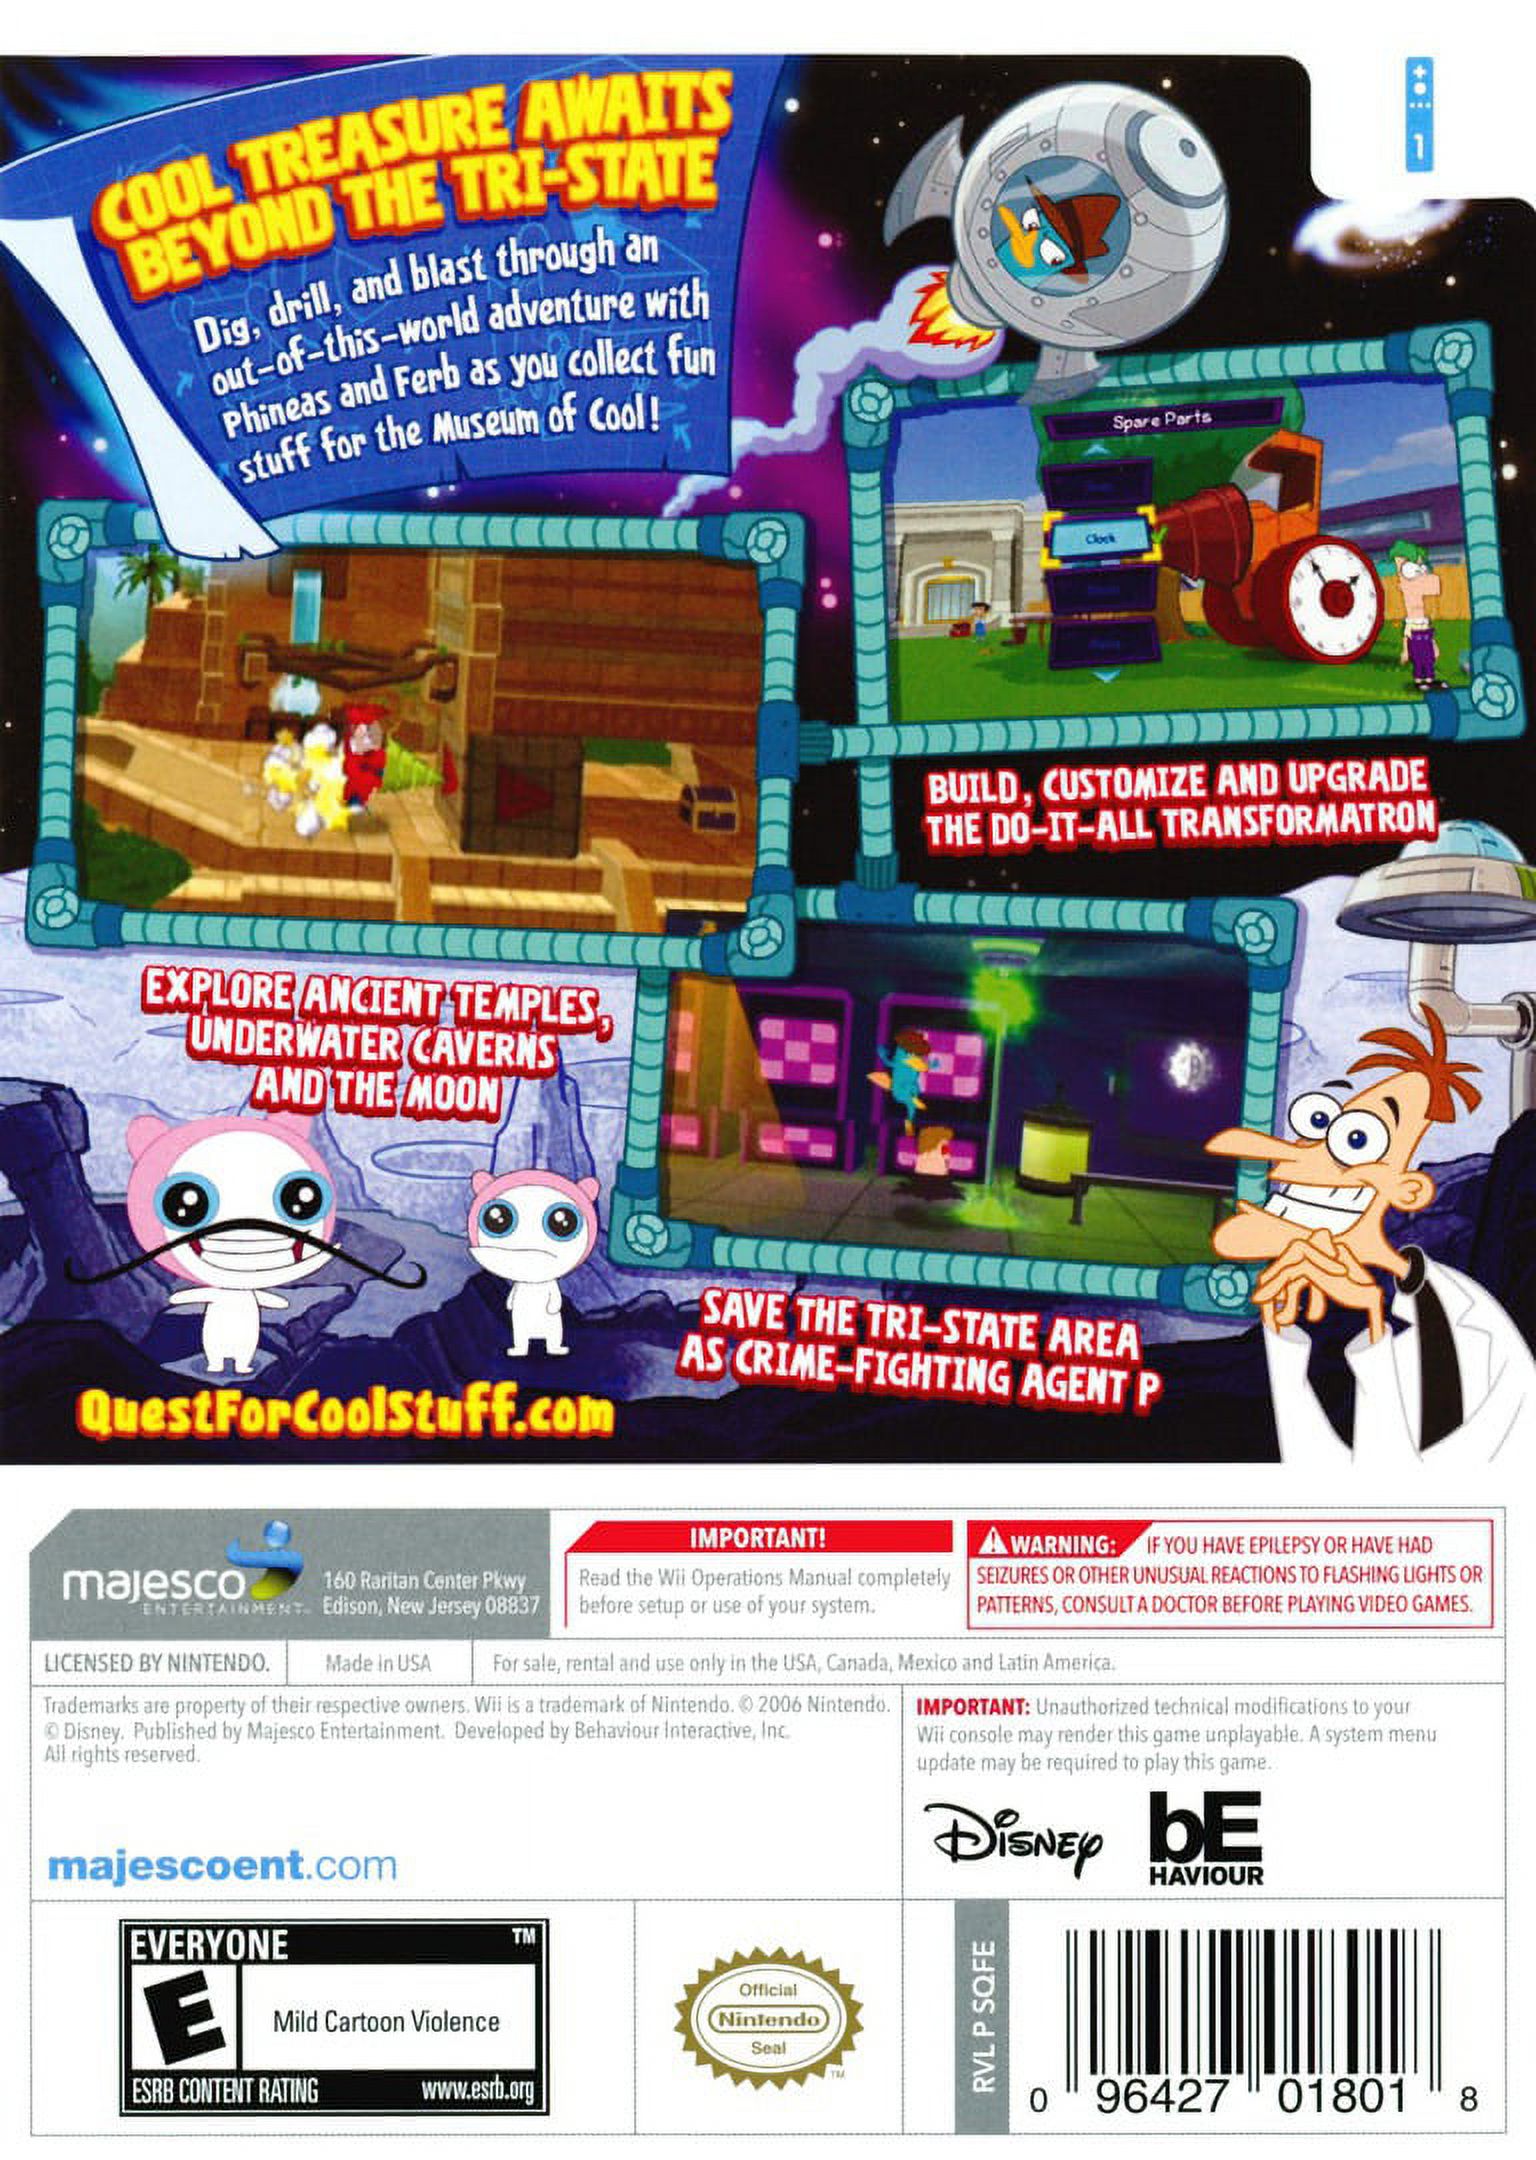 Phineas and Ferb Quest for Cool Stuff - Wii - image 2 of 3